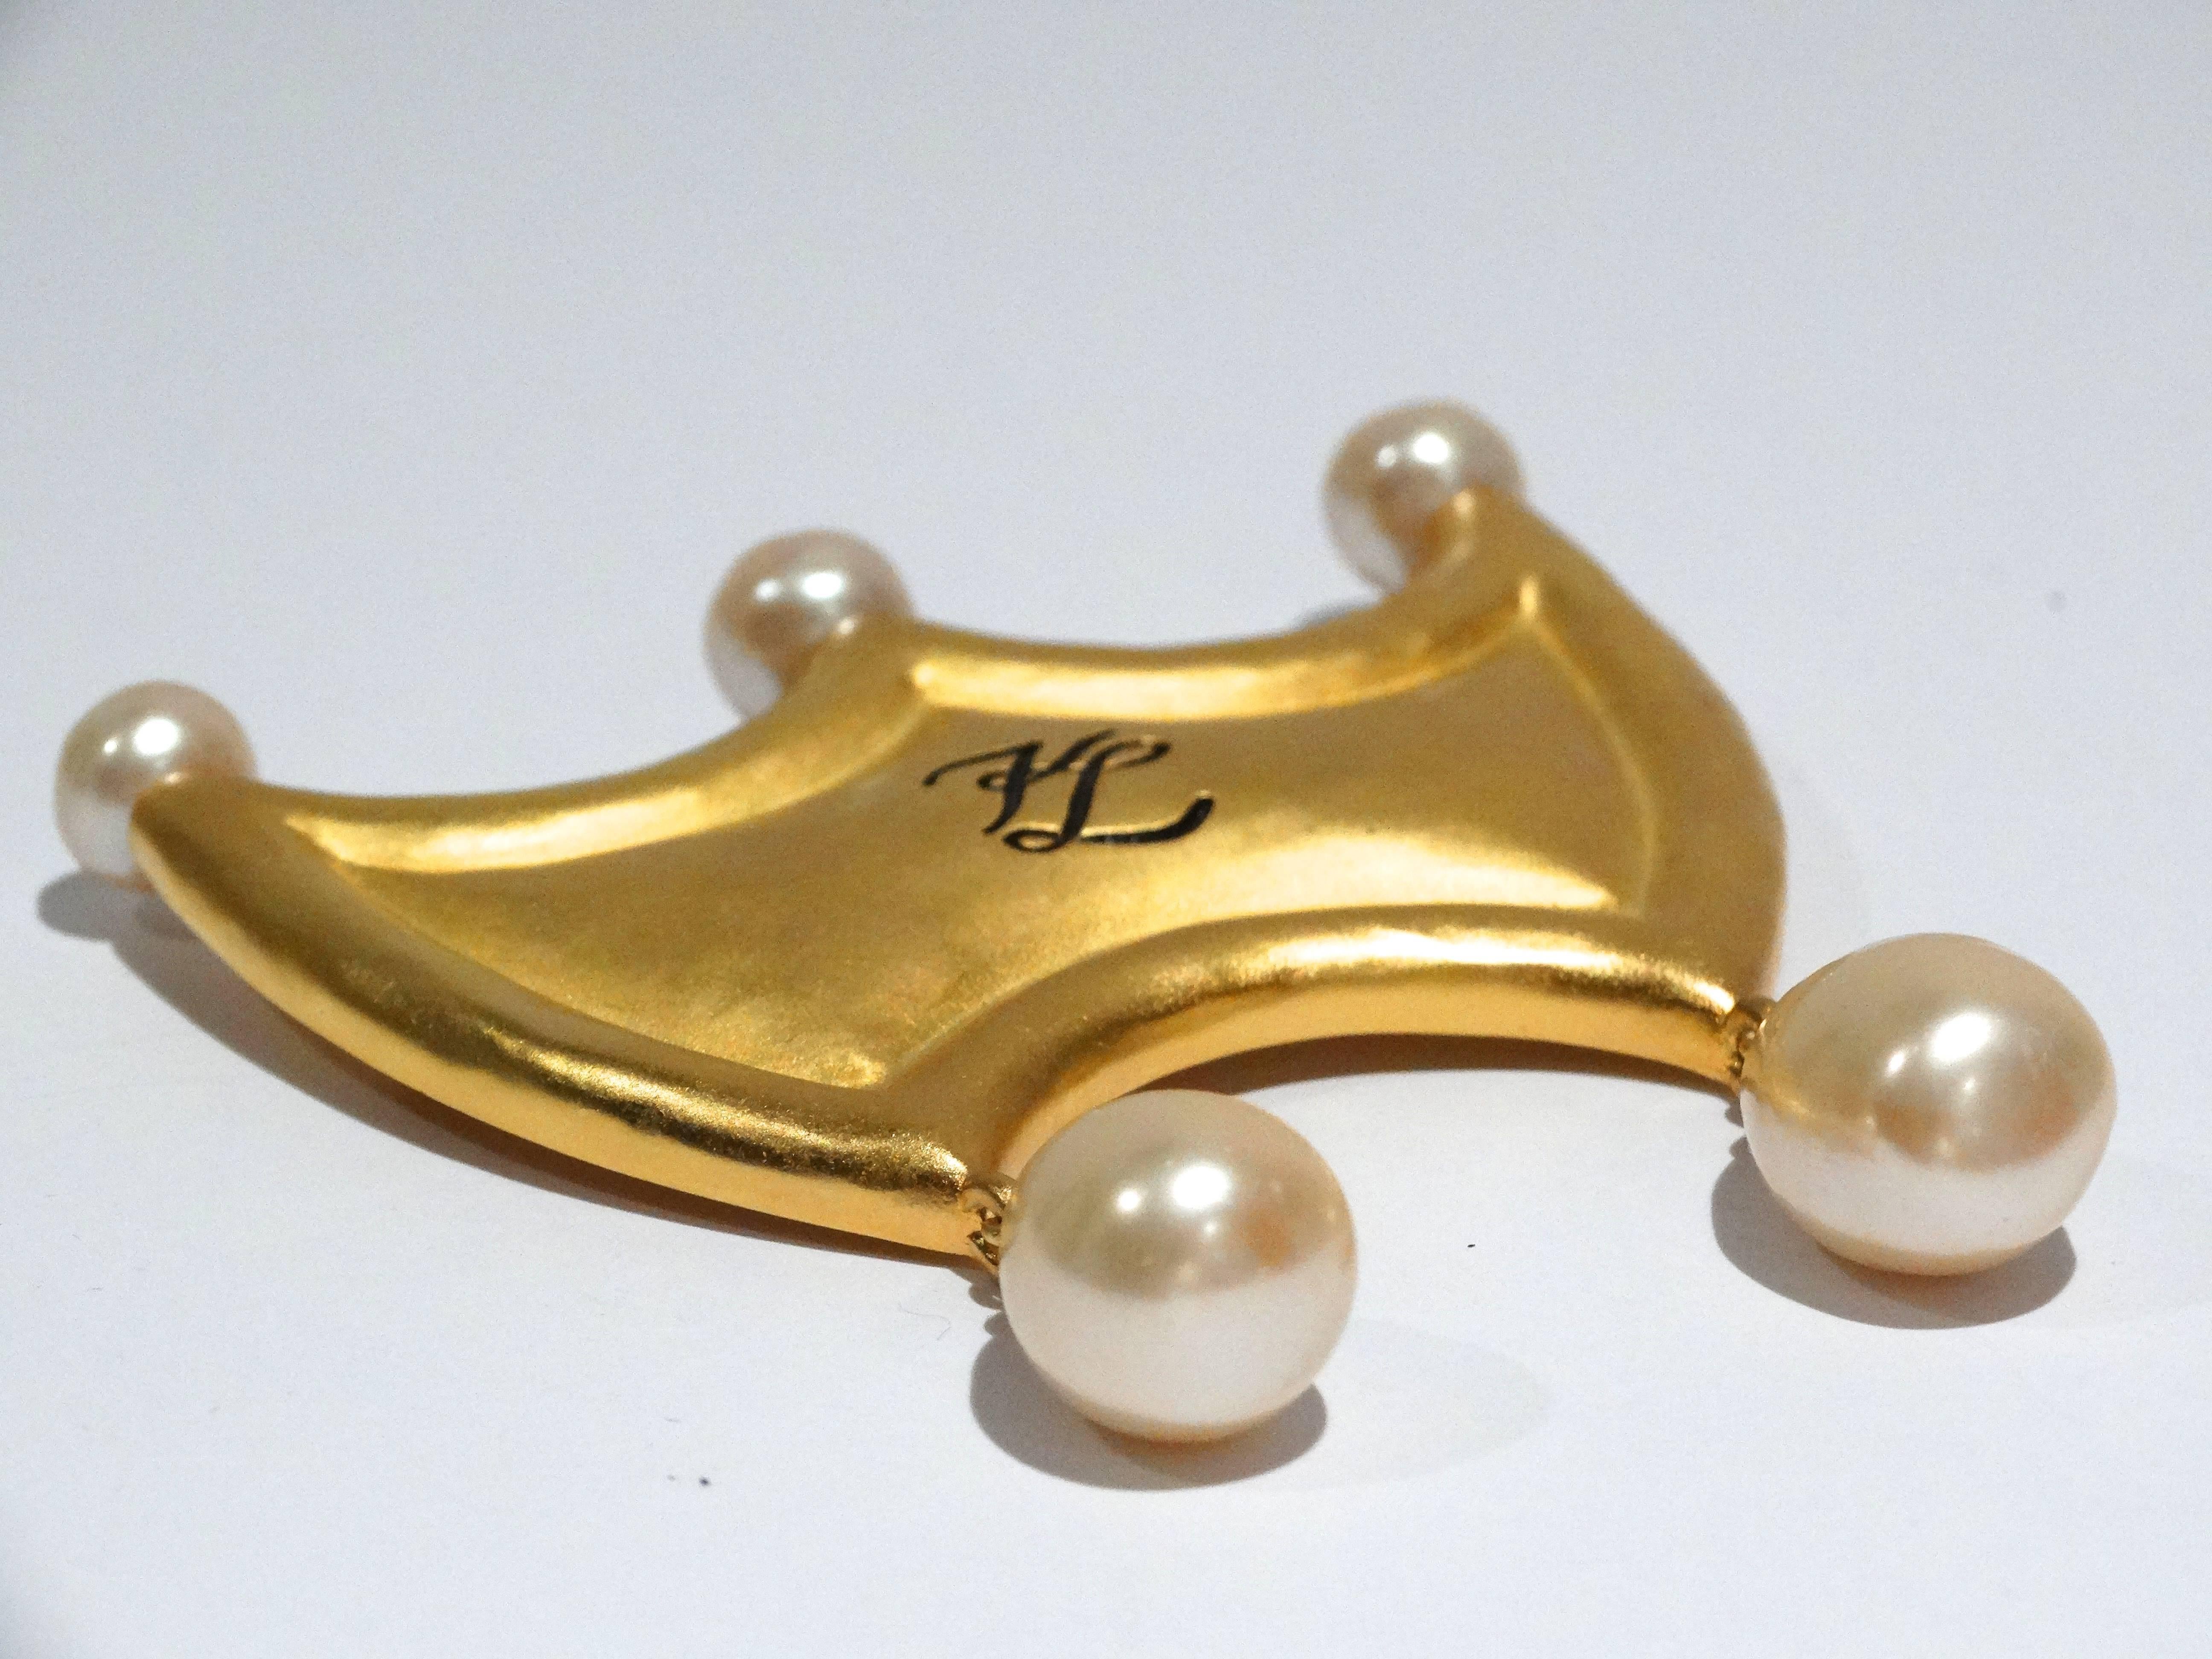 1980's large Karl Lagerfeld matte gilt gold crown with 5 faux pearls brooch pin. Signed KL on back for Karl Lagerfeld. This is brooch is in excellent condition with very minimal wear. The brooch measures 3